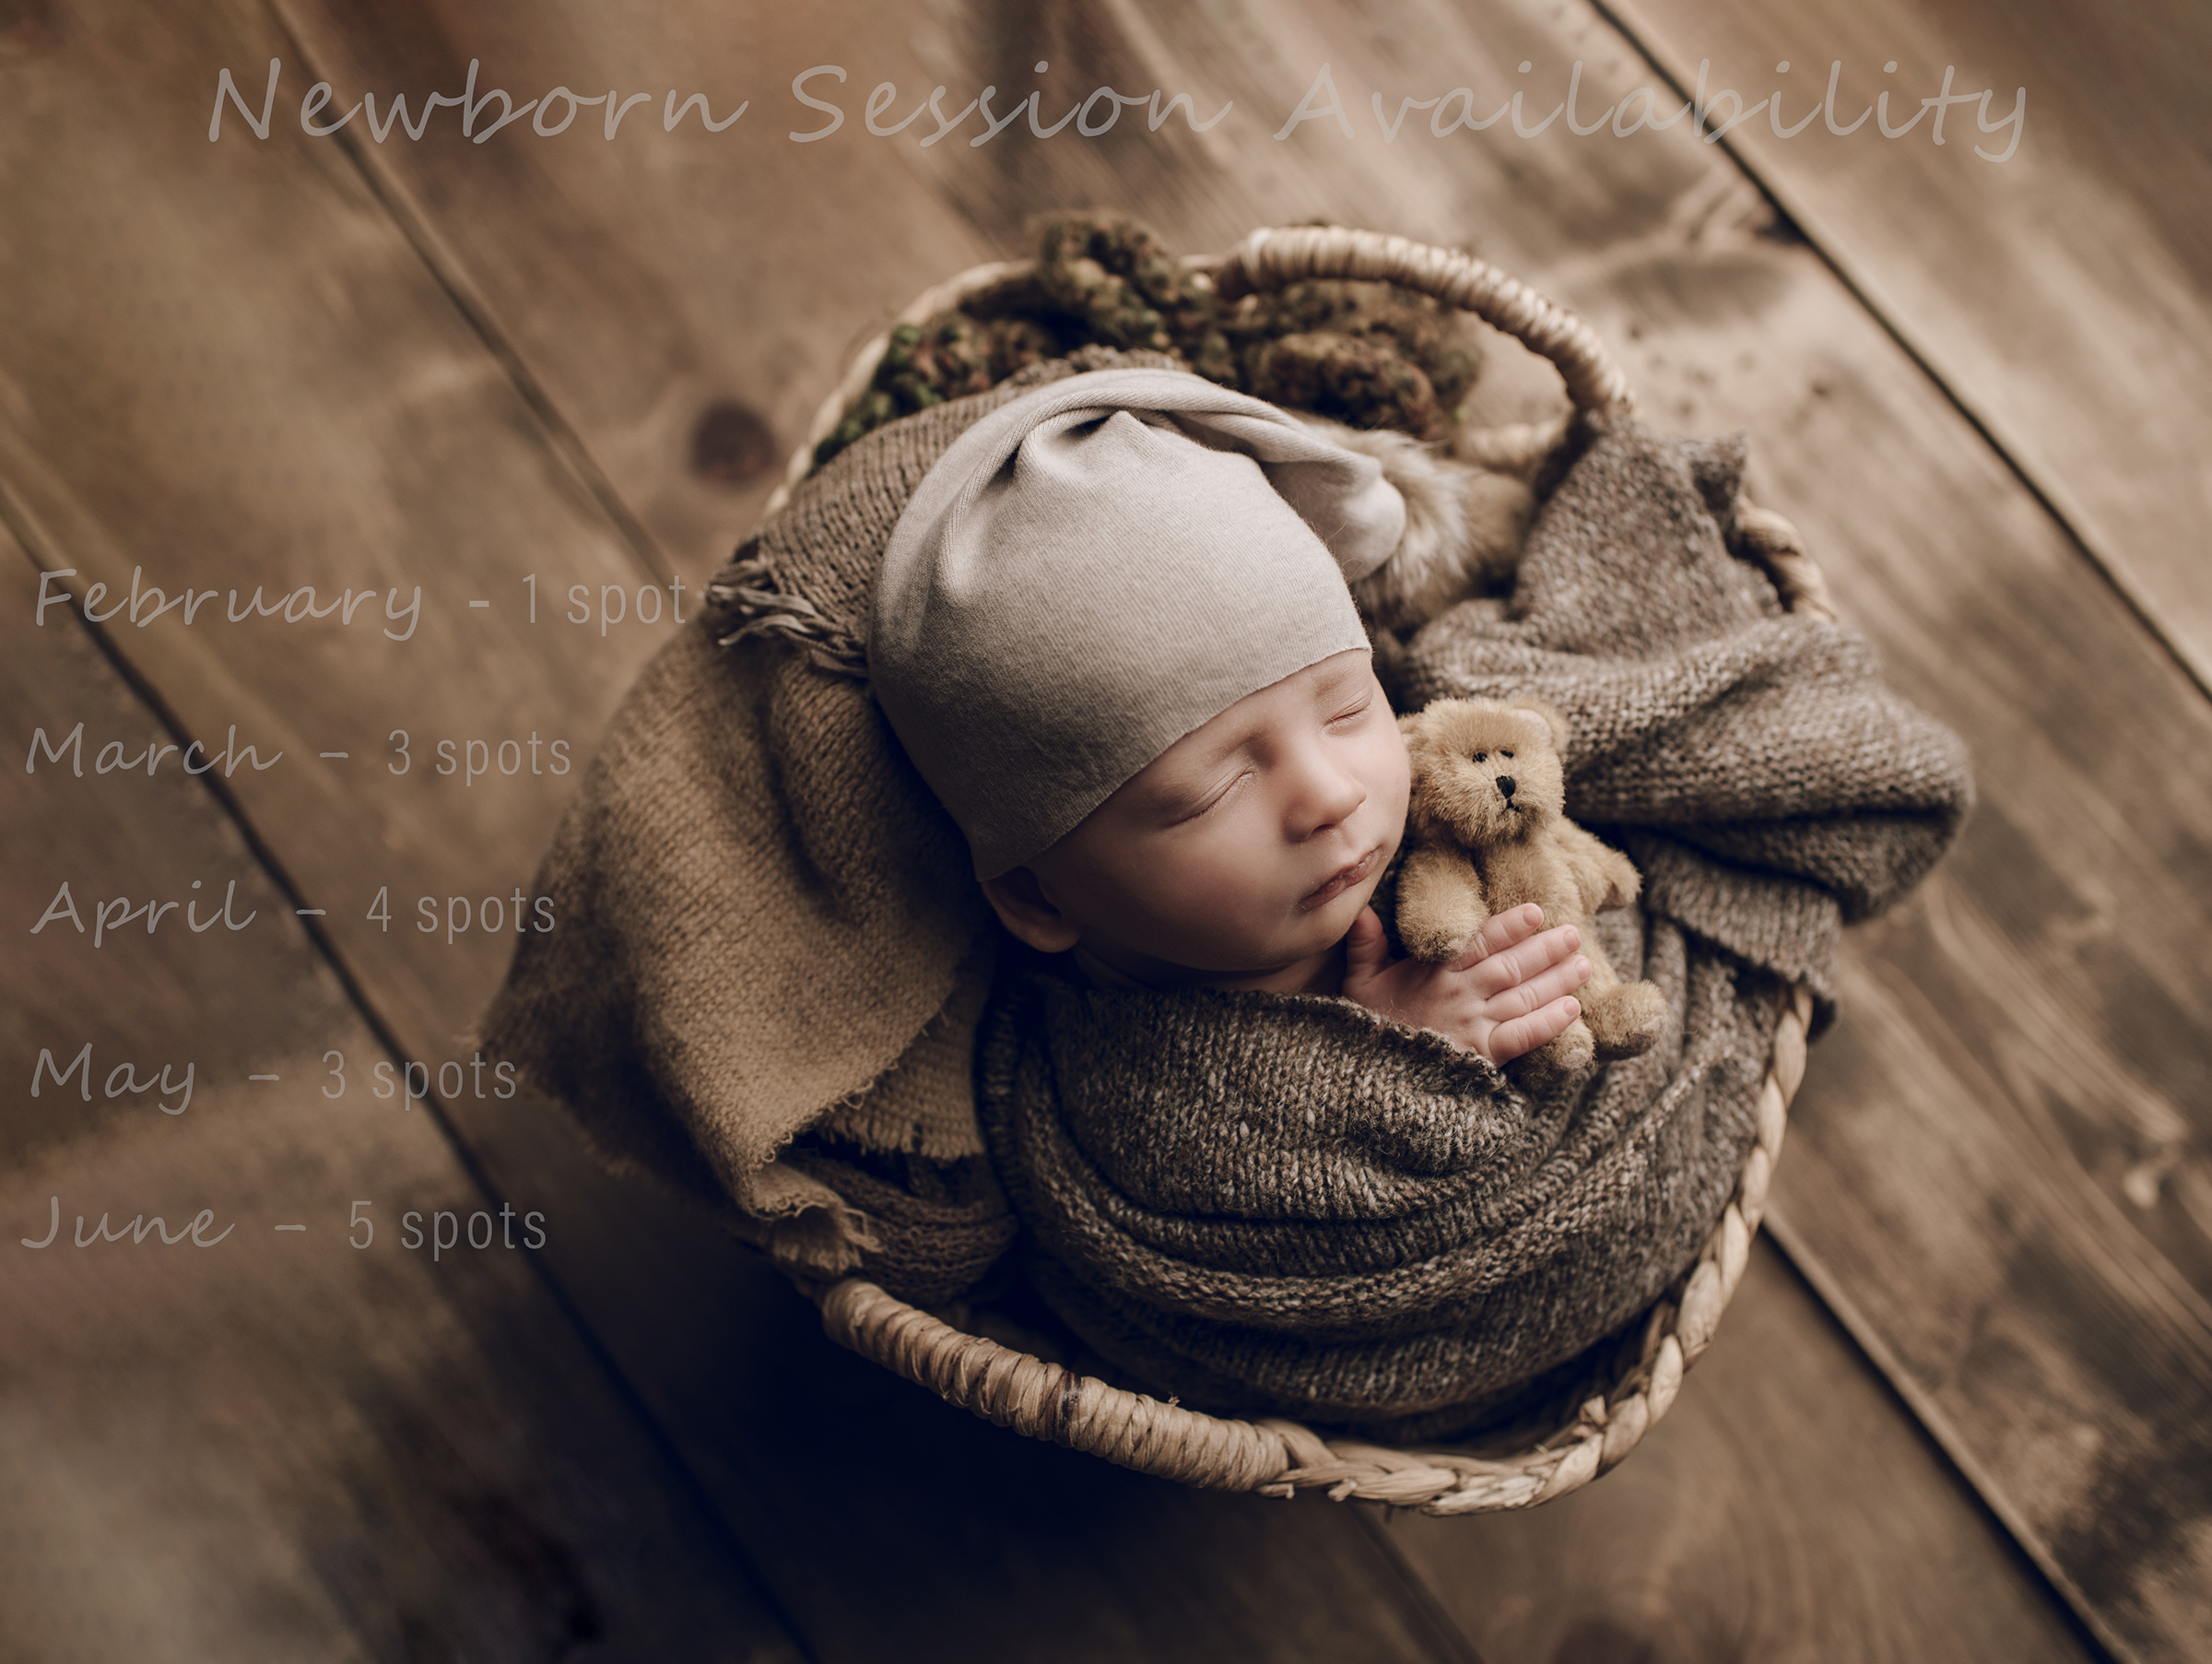 Upcoming Newborn Session Availability